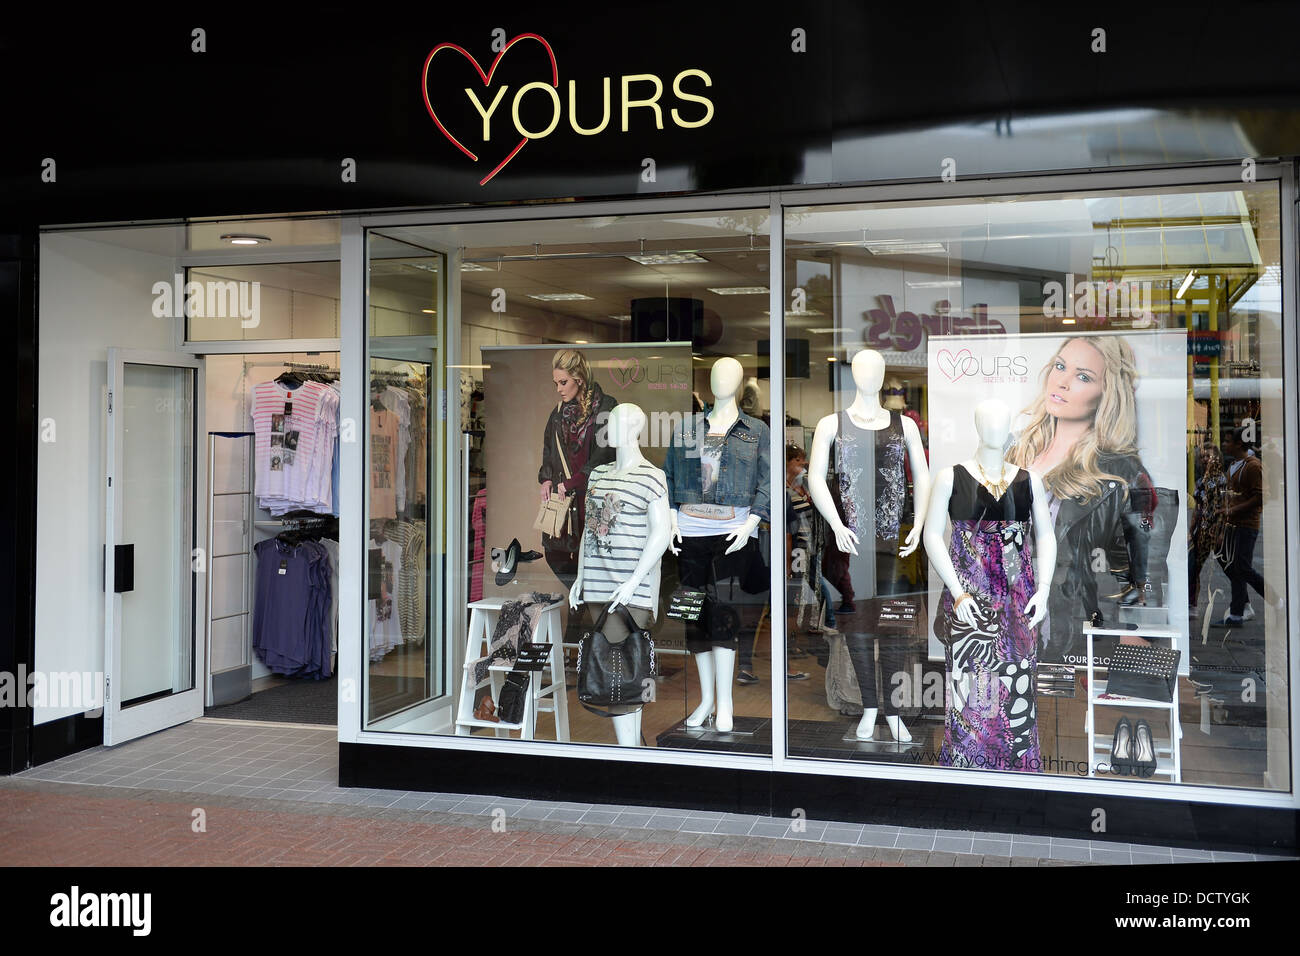 Yours retail clothing store Stock Photo